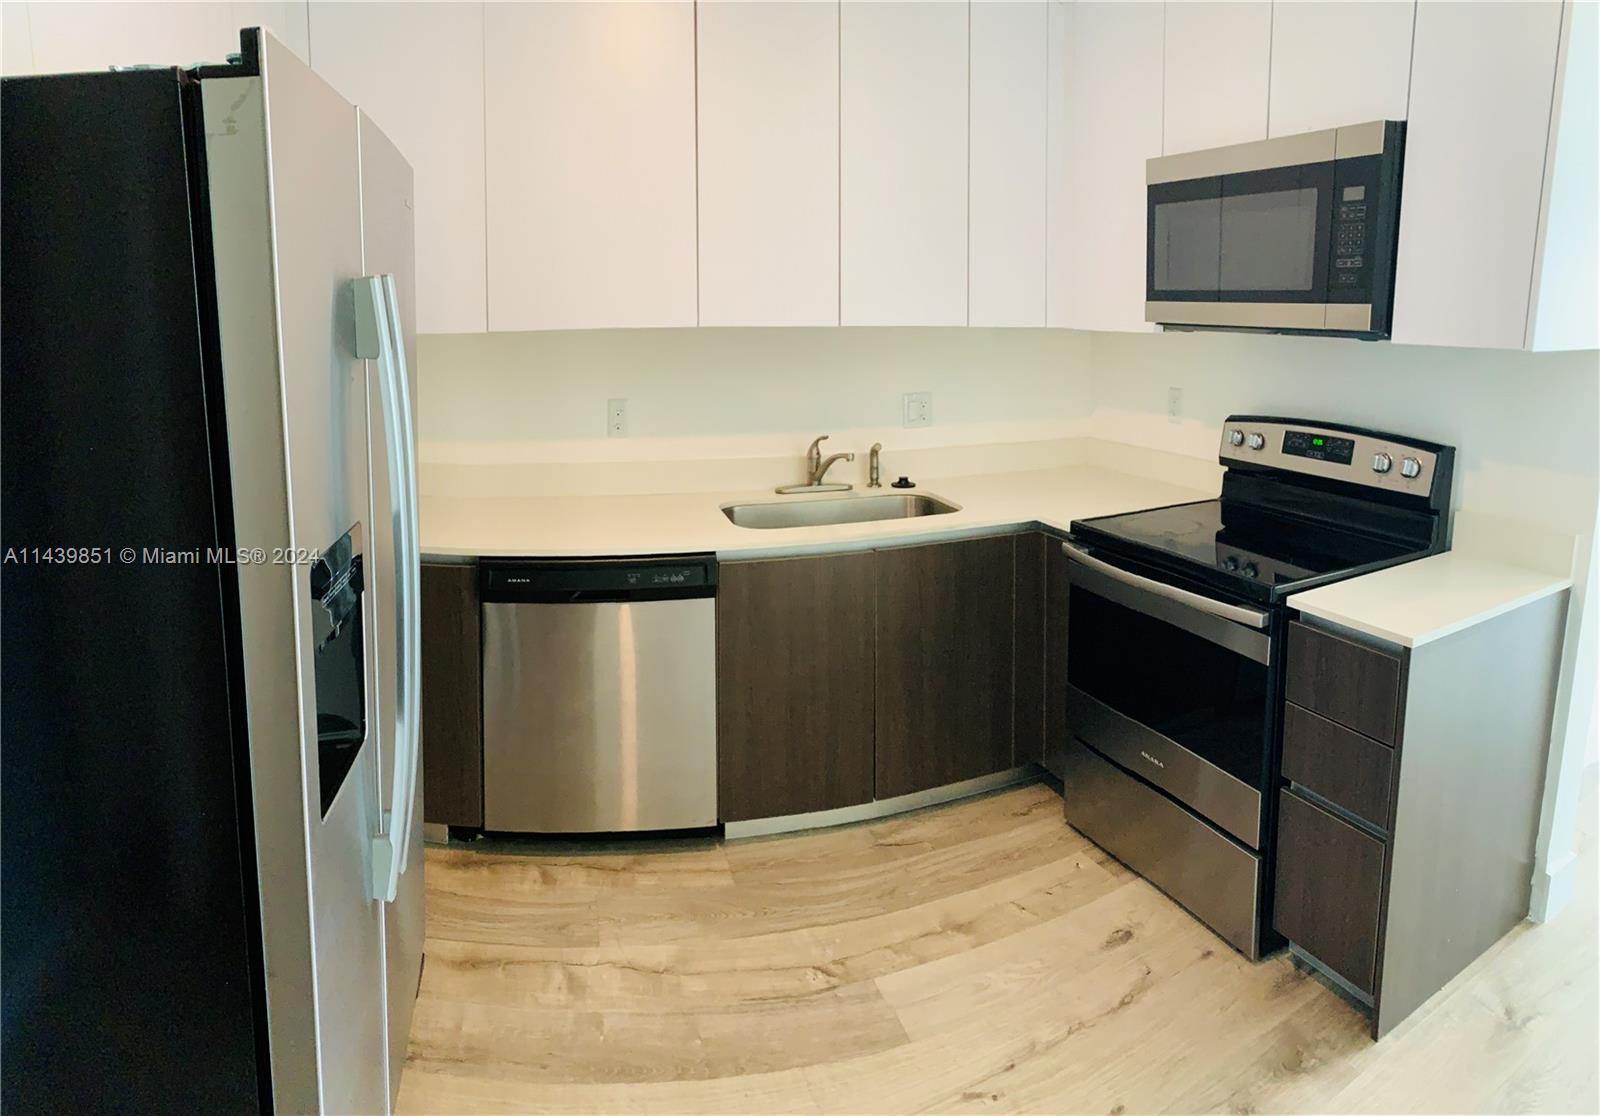 a kitchen with a stove refrigerator and microwave